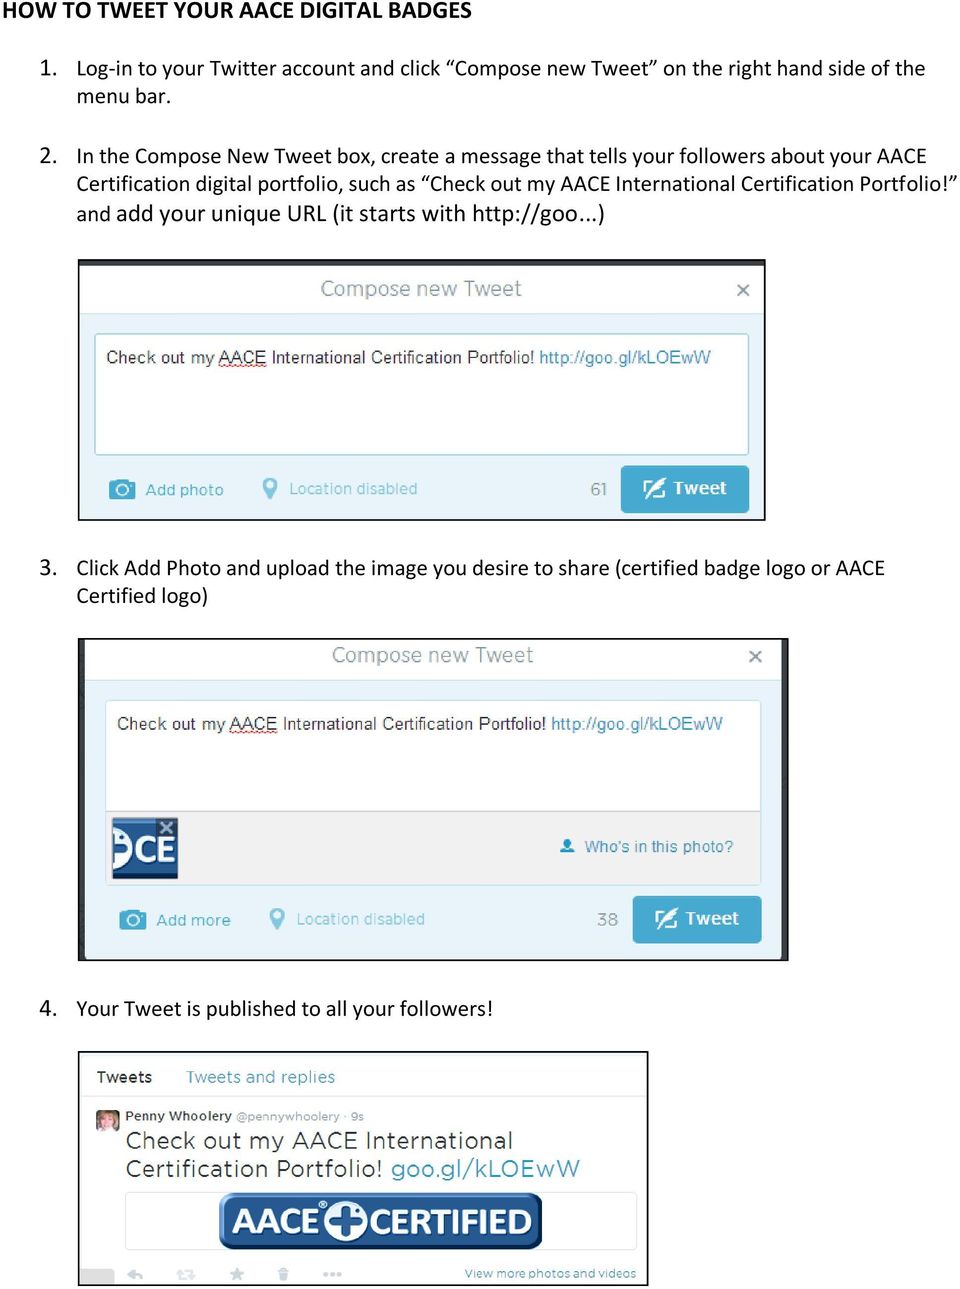 In the Compose New Tweet box, create a message that tells your followers about your AACE Certification digital portfolio, such as